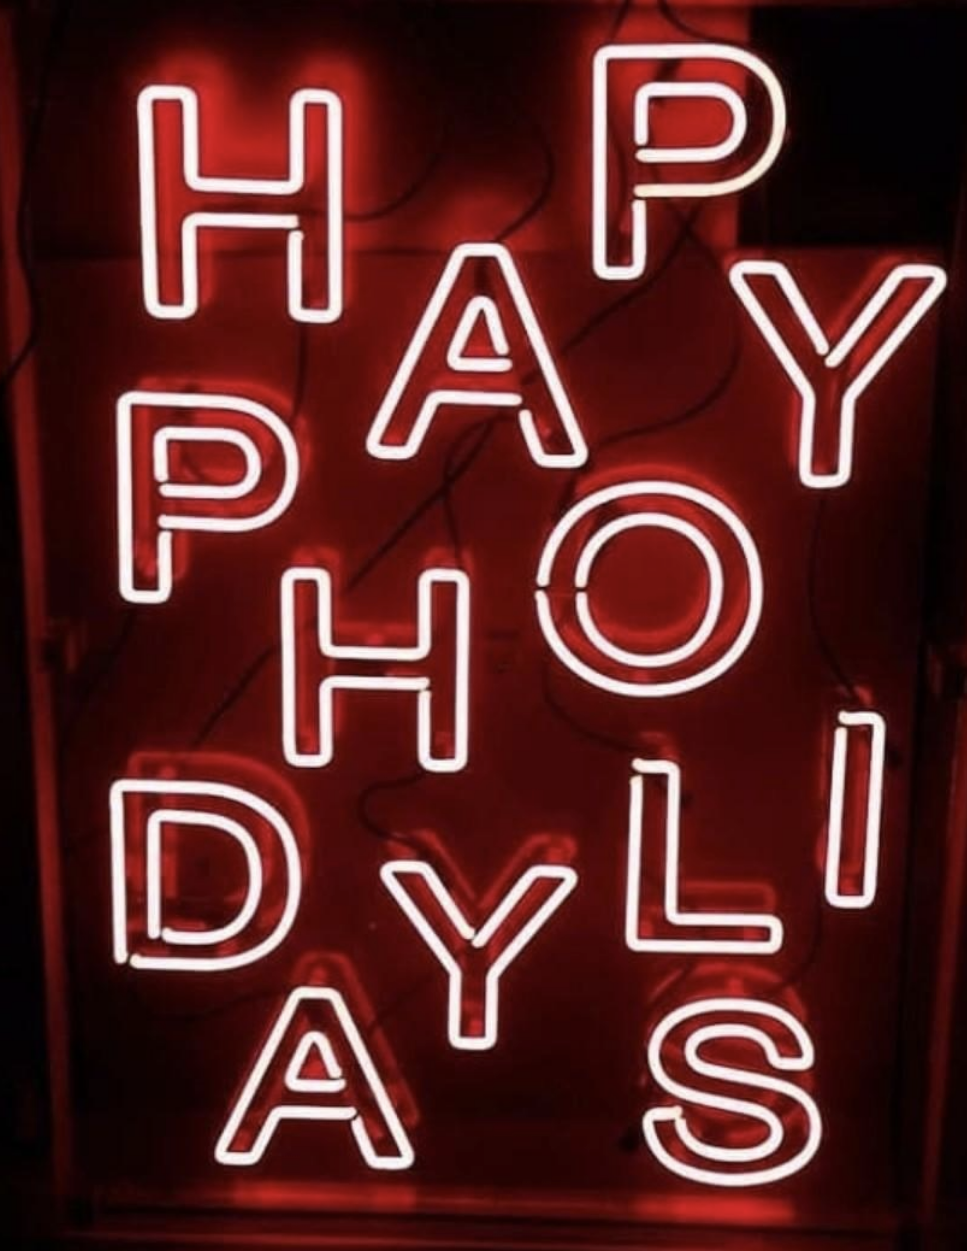 &quot;Happy holidays&quot; spelled out in neon lights in a very confusing way